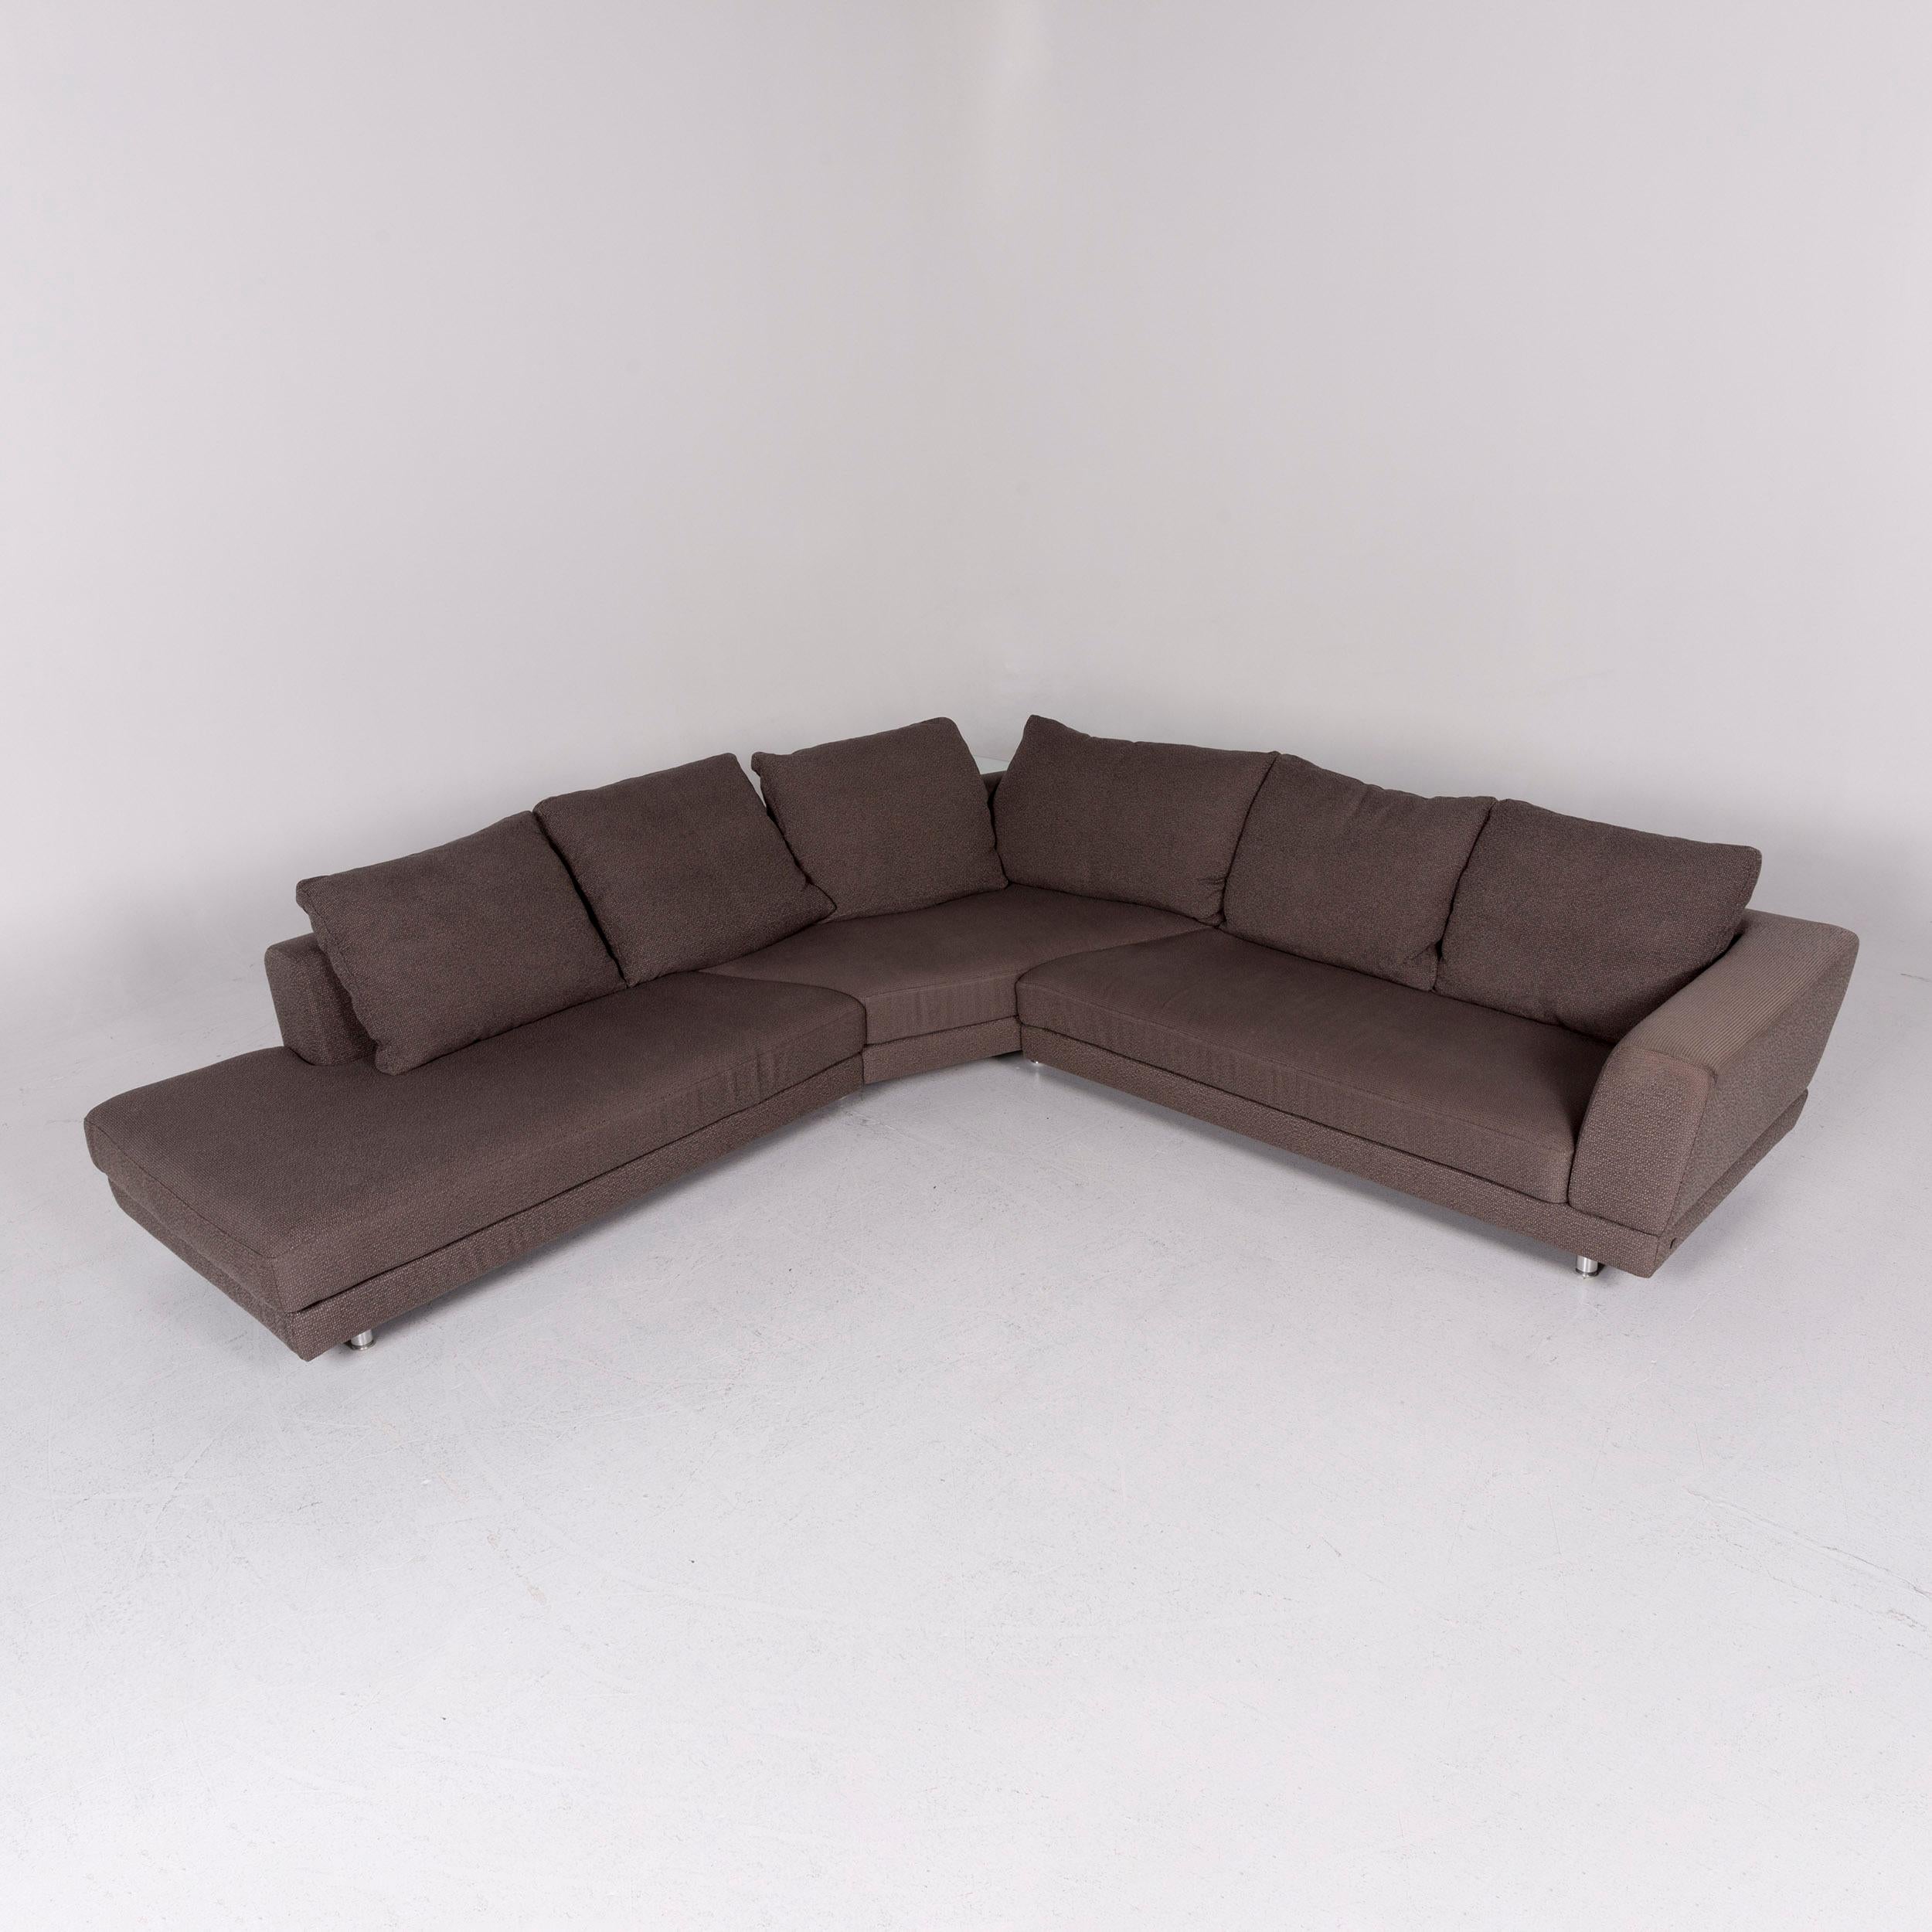 We bring to you a Rolf Benz Ego fabric corner sofa gray beige gray taupe sofa couch includes glass.
 
 Product measurements in centimeters:
 
Depth 97
Width 289
Height 77
Seat-height 40
Rest-height 63
Seat-depth 49
Seat-width